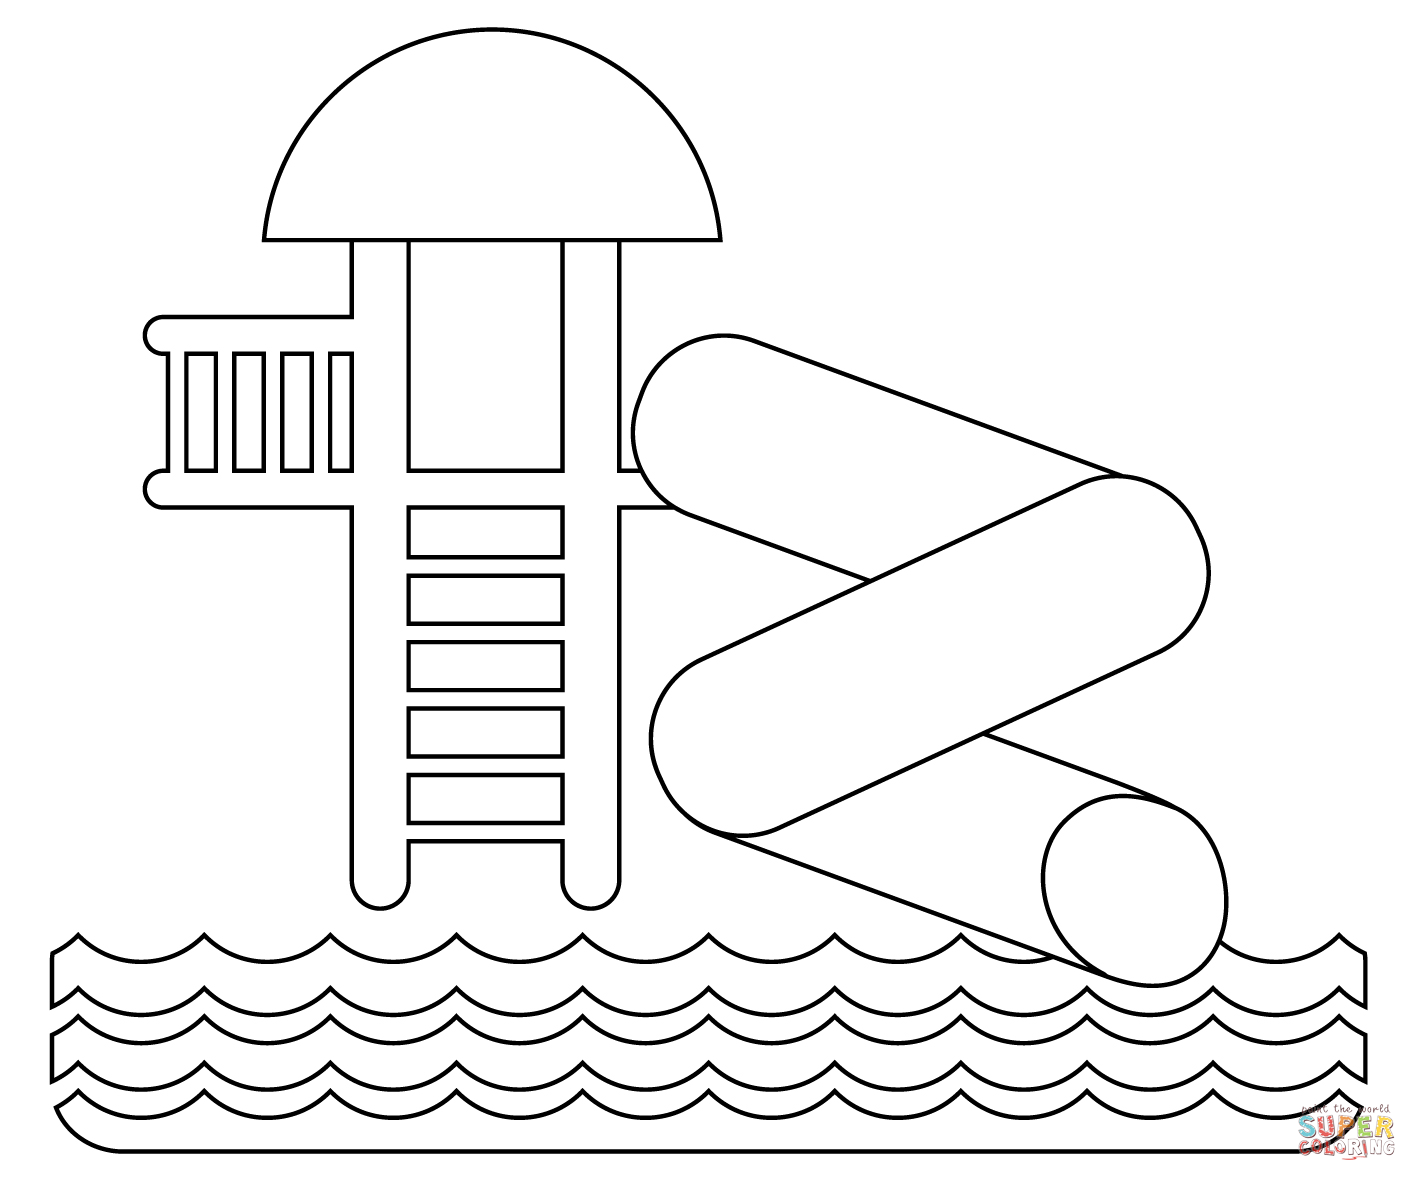 Water slide coloring page free printable coloring pages